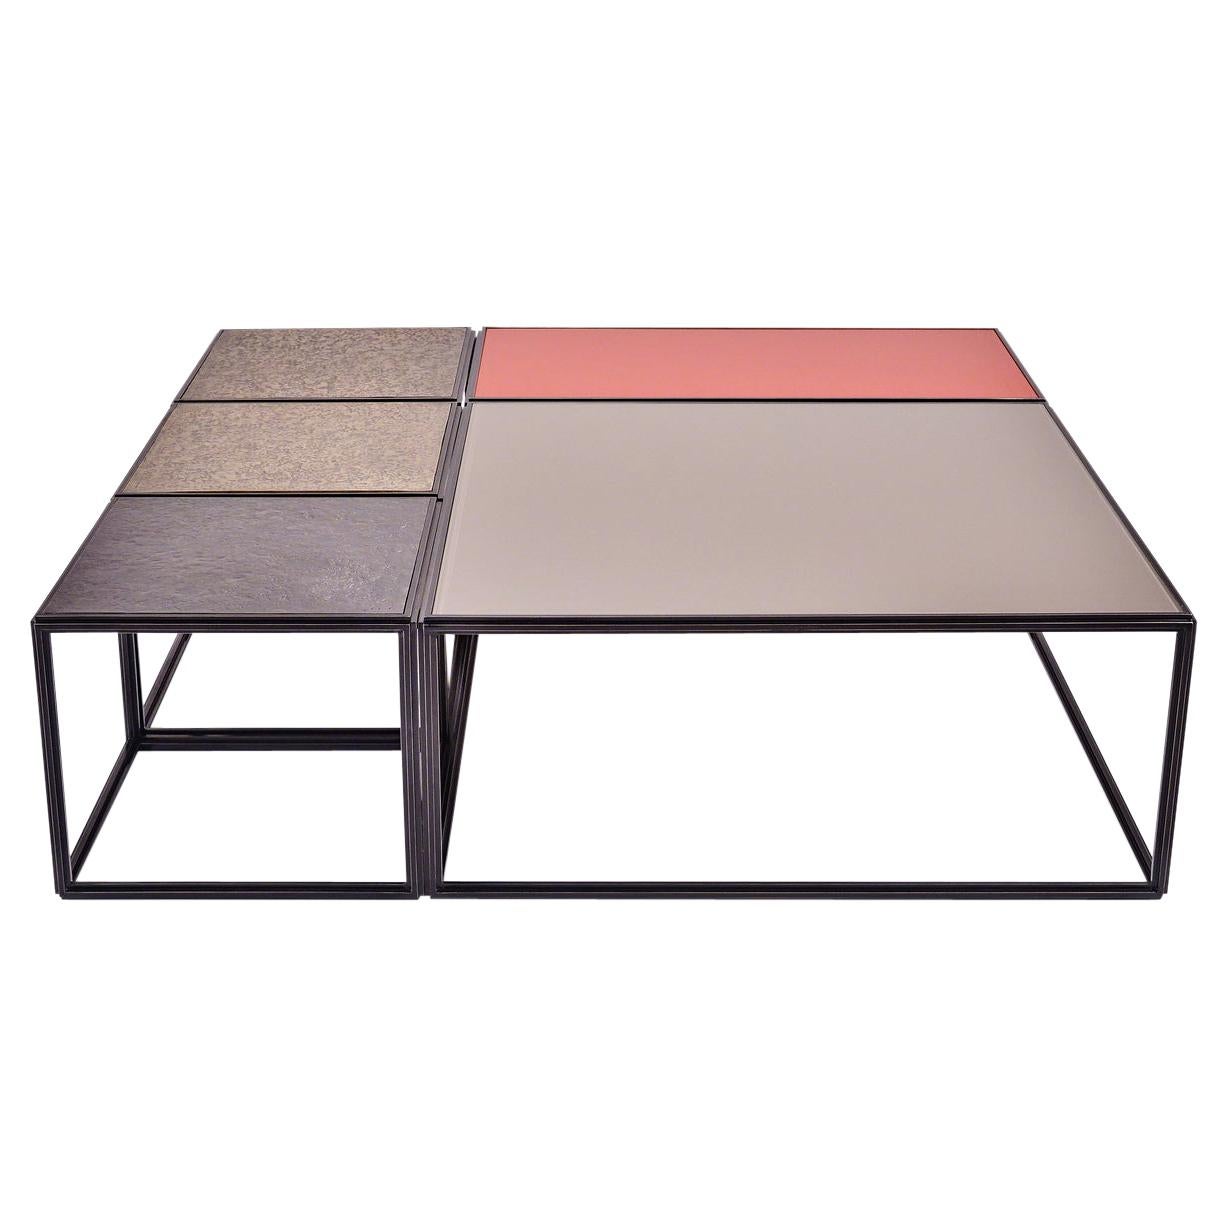 Modular "Mondrian" Brass, Bronze and Glass Low Table, by P. Tendercool For Sale